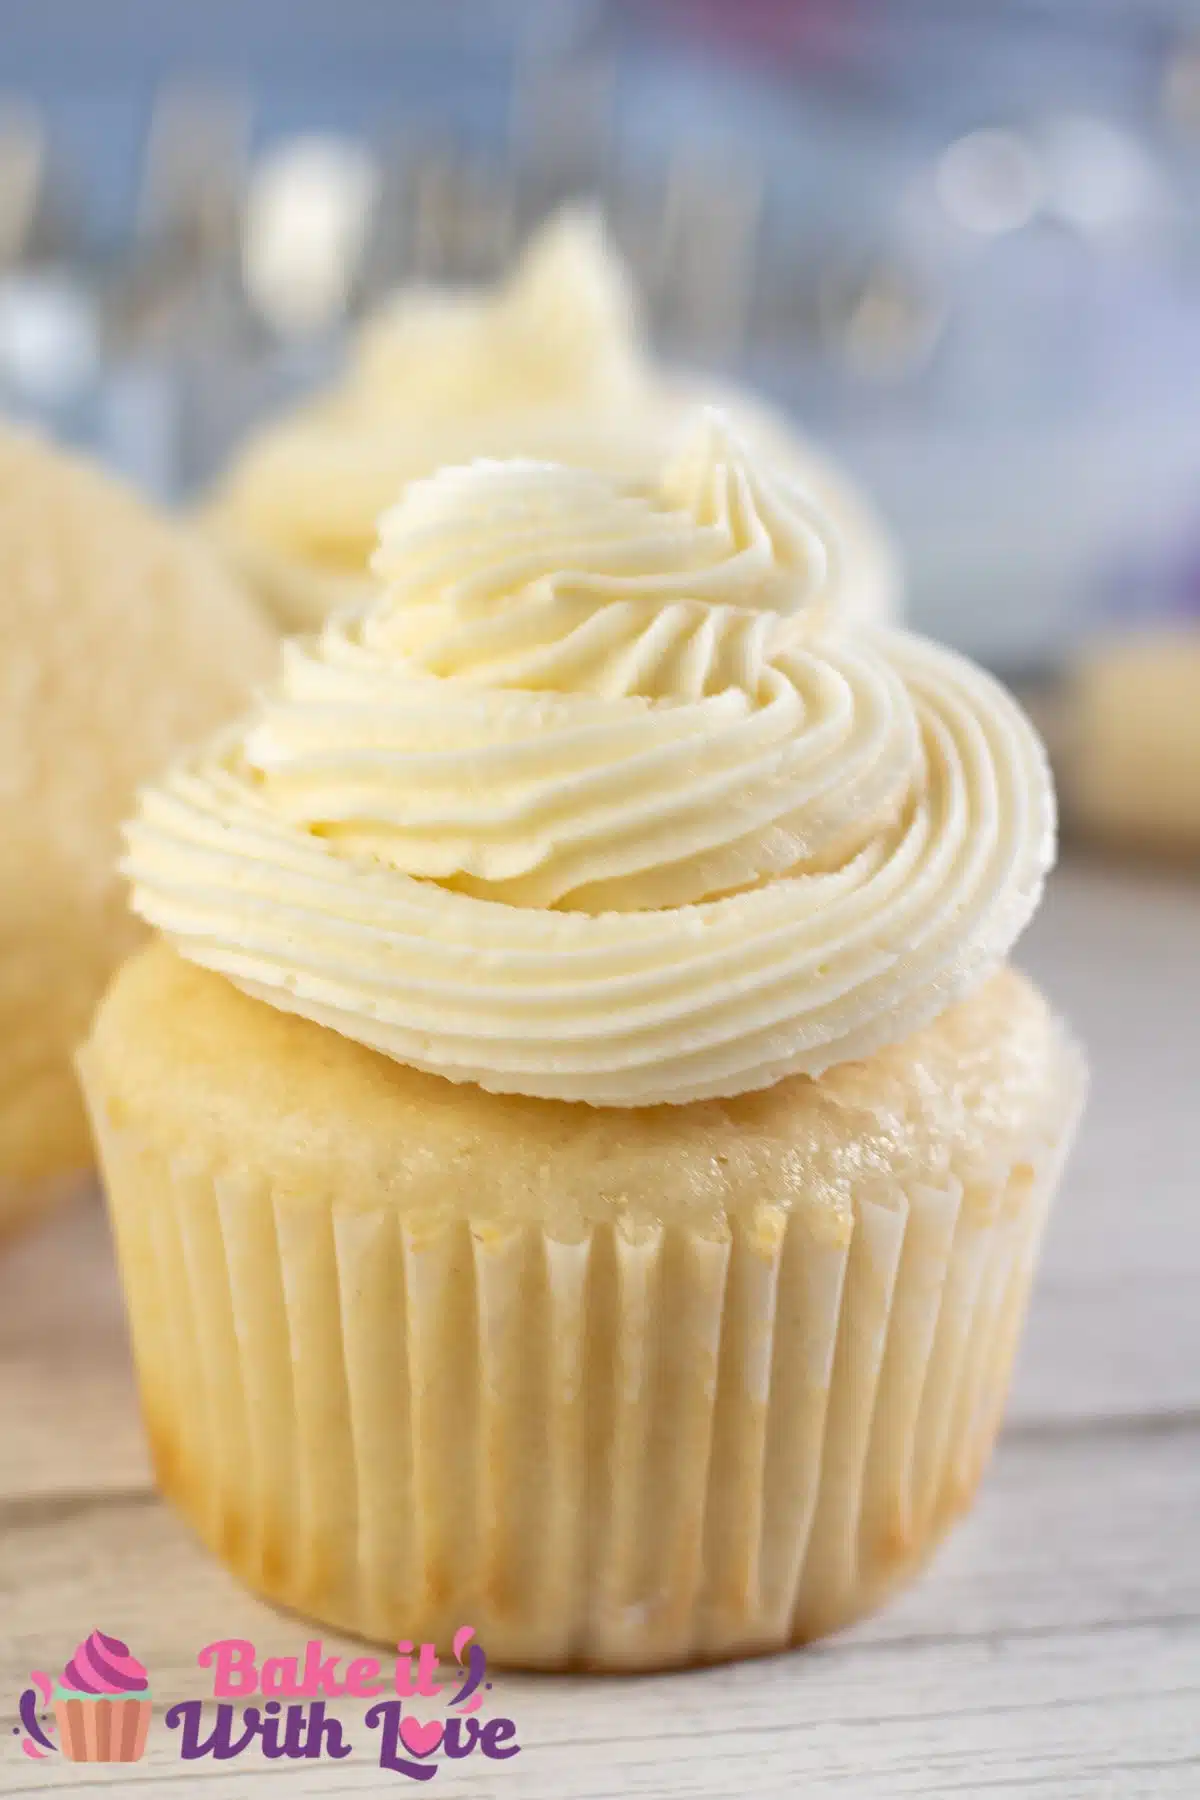 Tall image showing vanilla buttercream frosting on a cupcake.